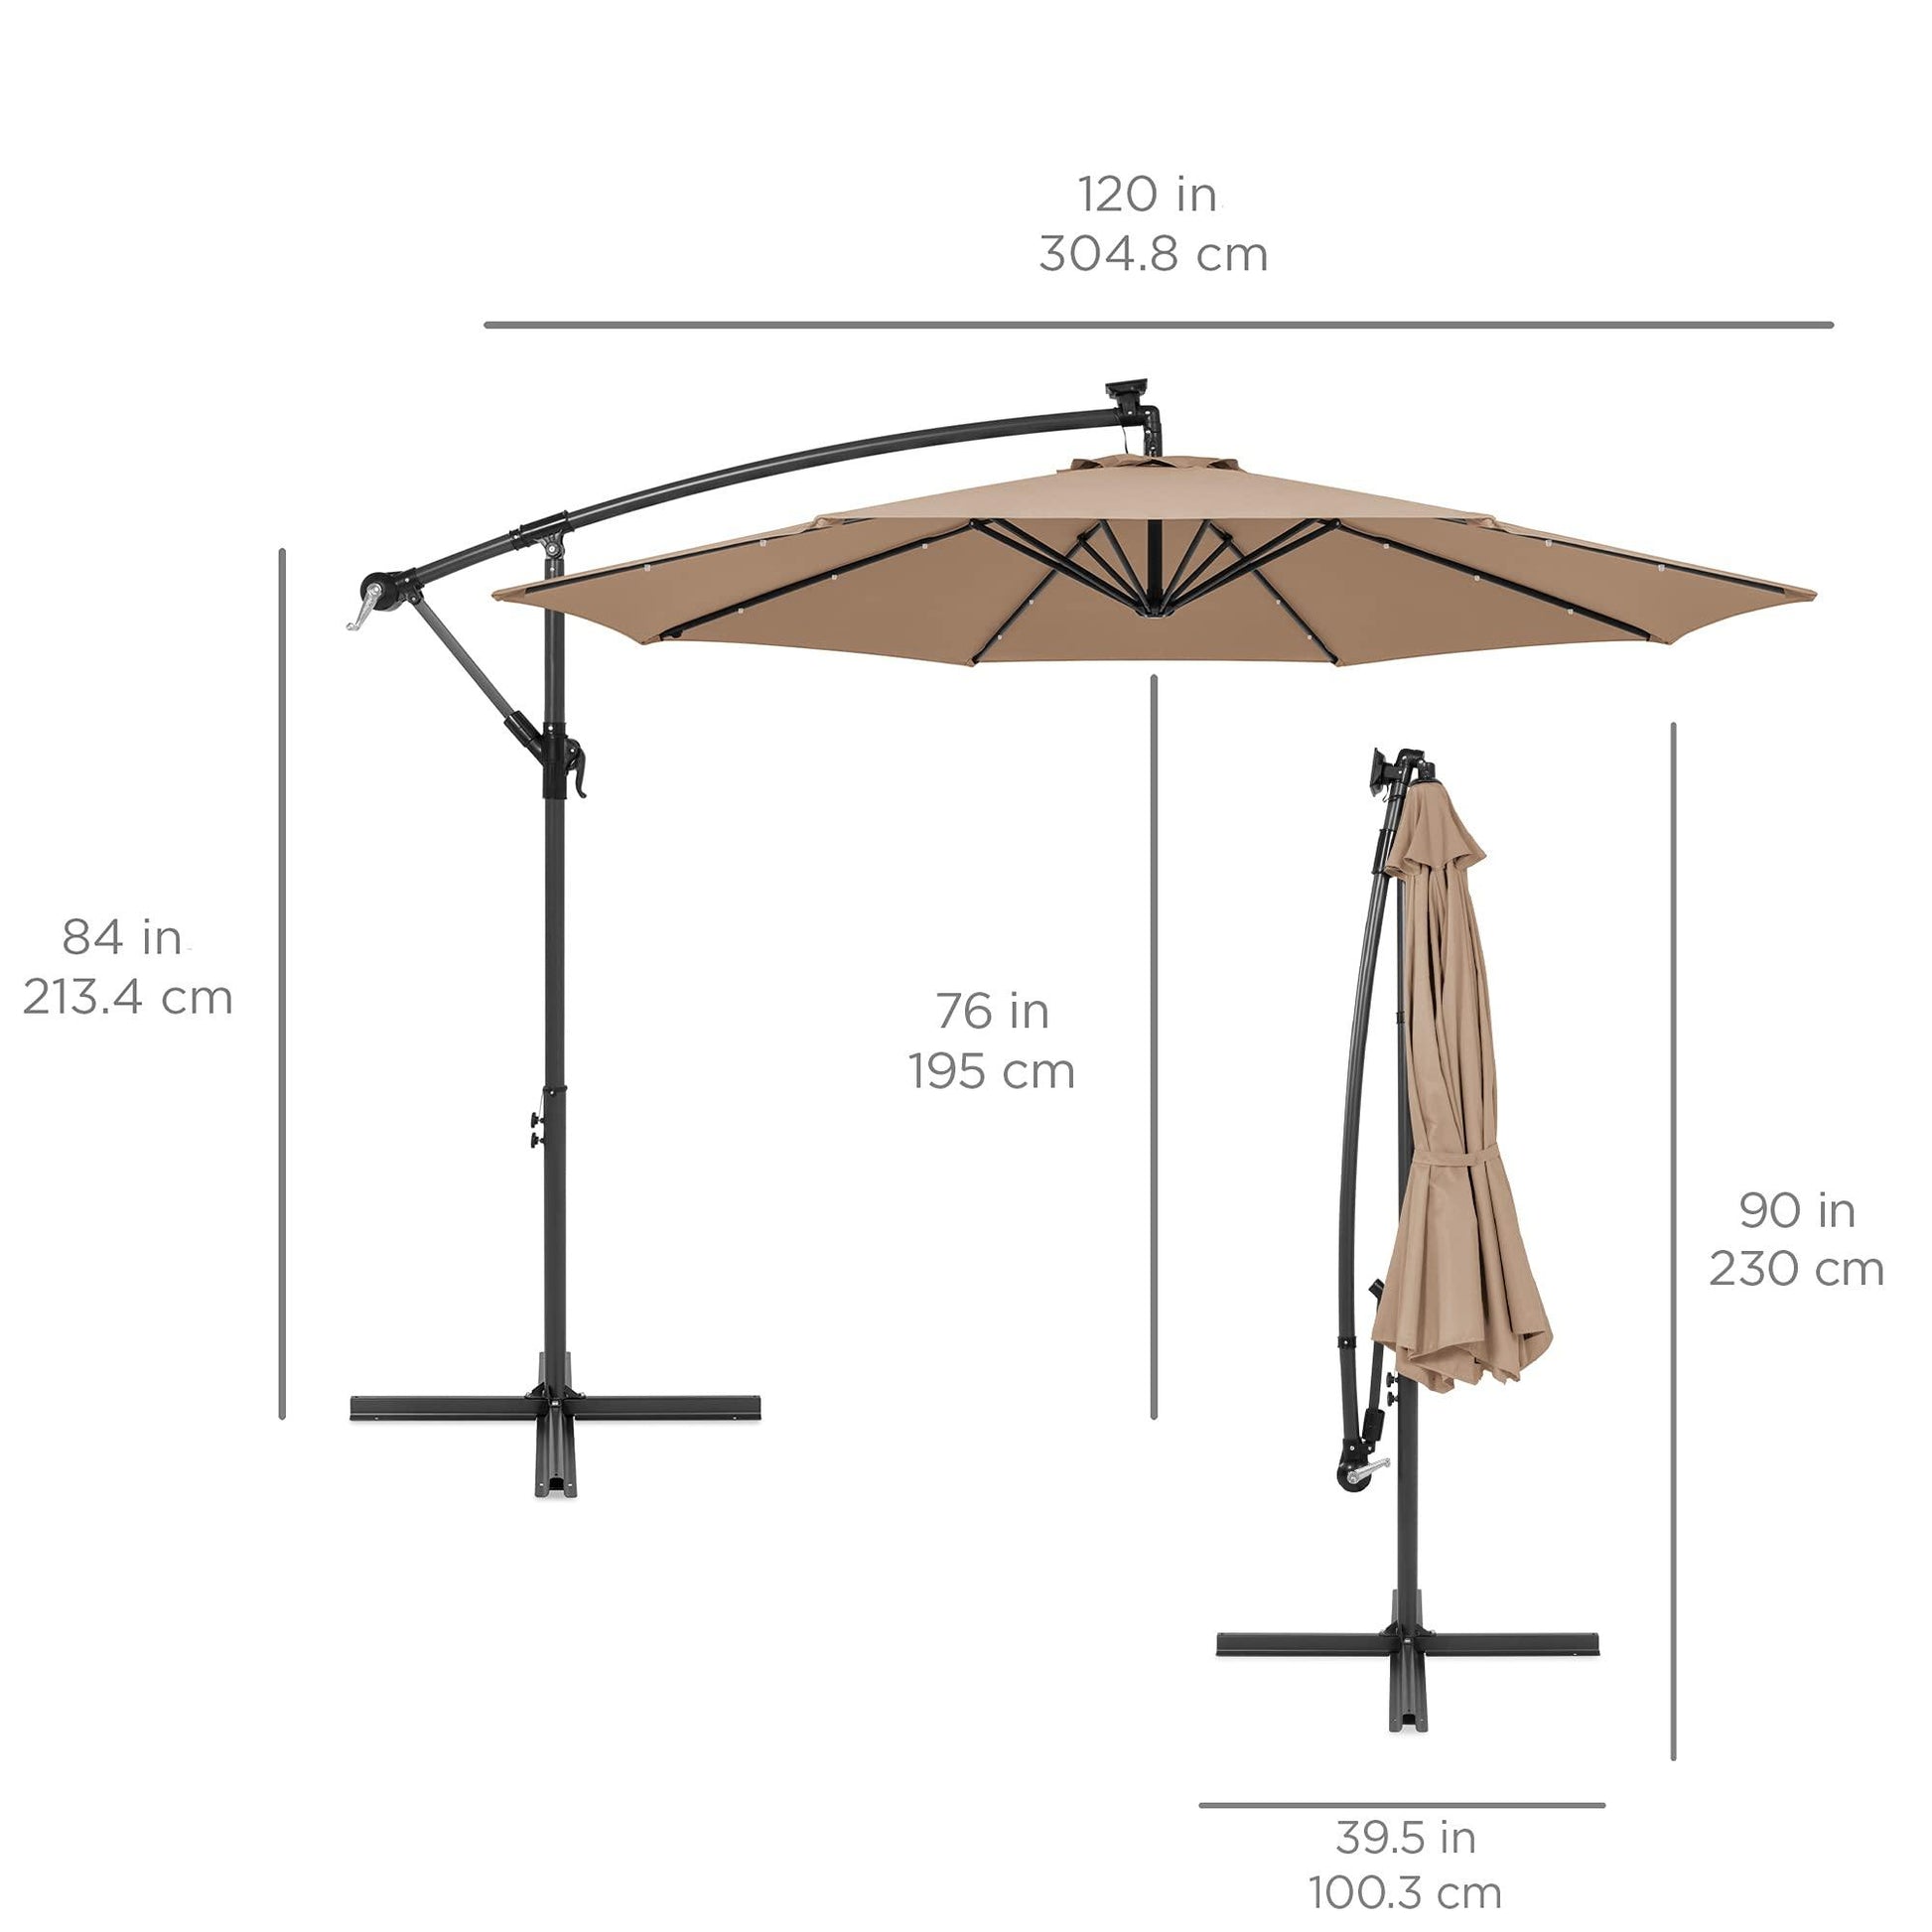 Best Choice Products 10ft Solar LED Offset Hanging Market Patio Umbrella for Backyard, Poolside, Lawn and Garden w/Easy Tilt Adjustment, Polyester Shade, 8 Ribs - Tan - CookCave